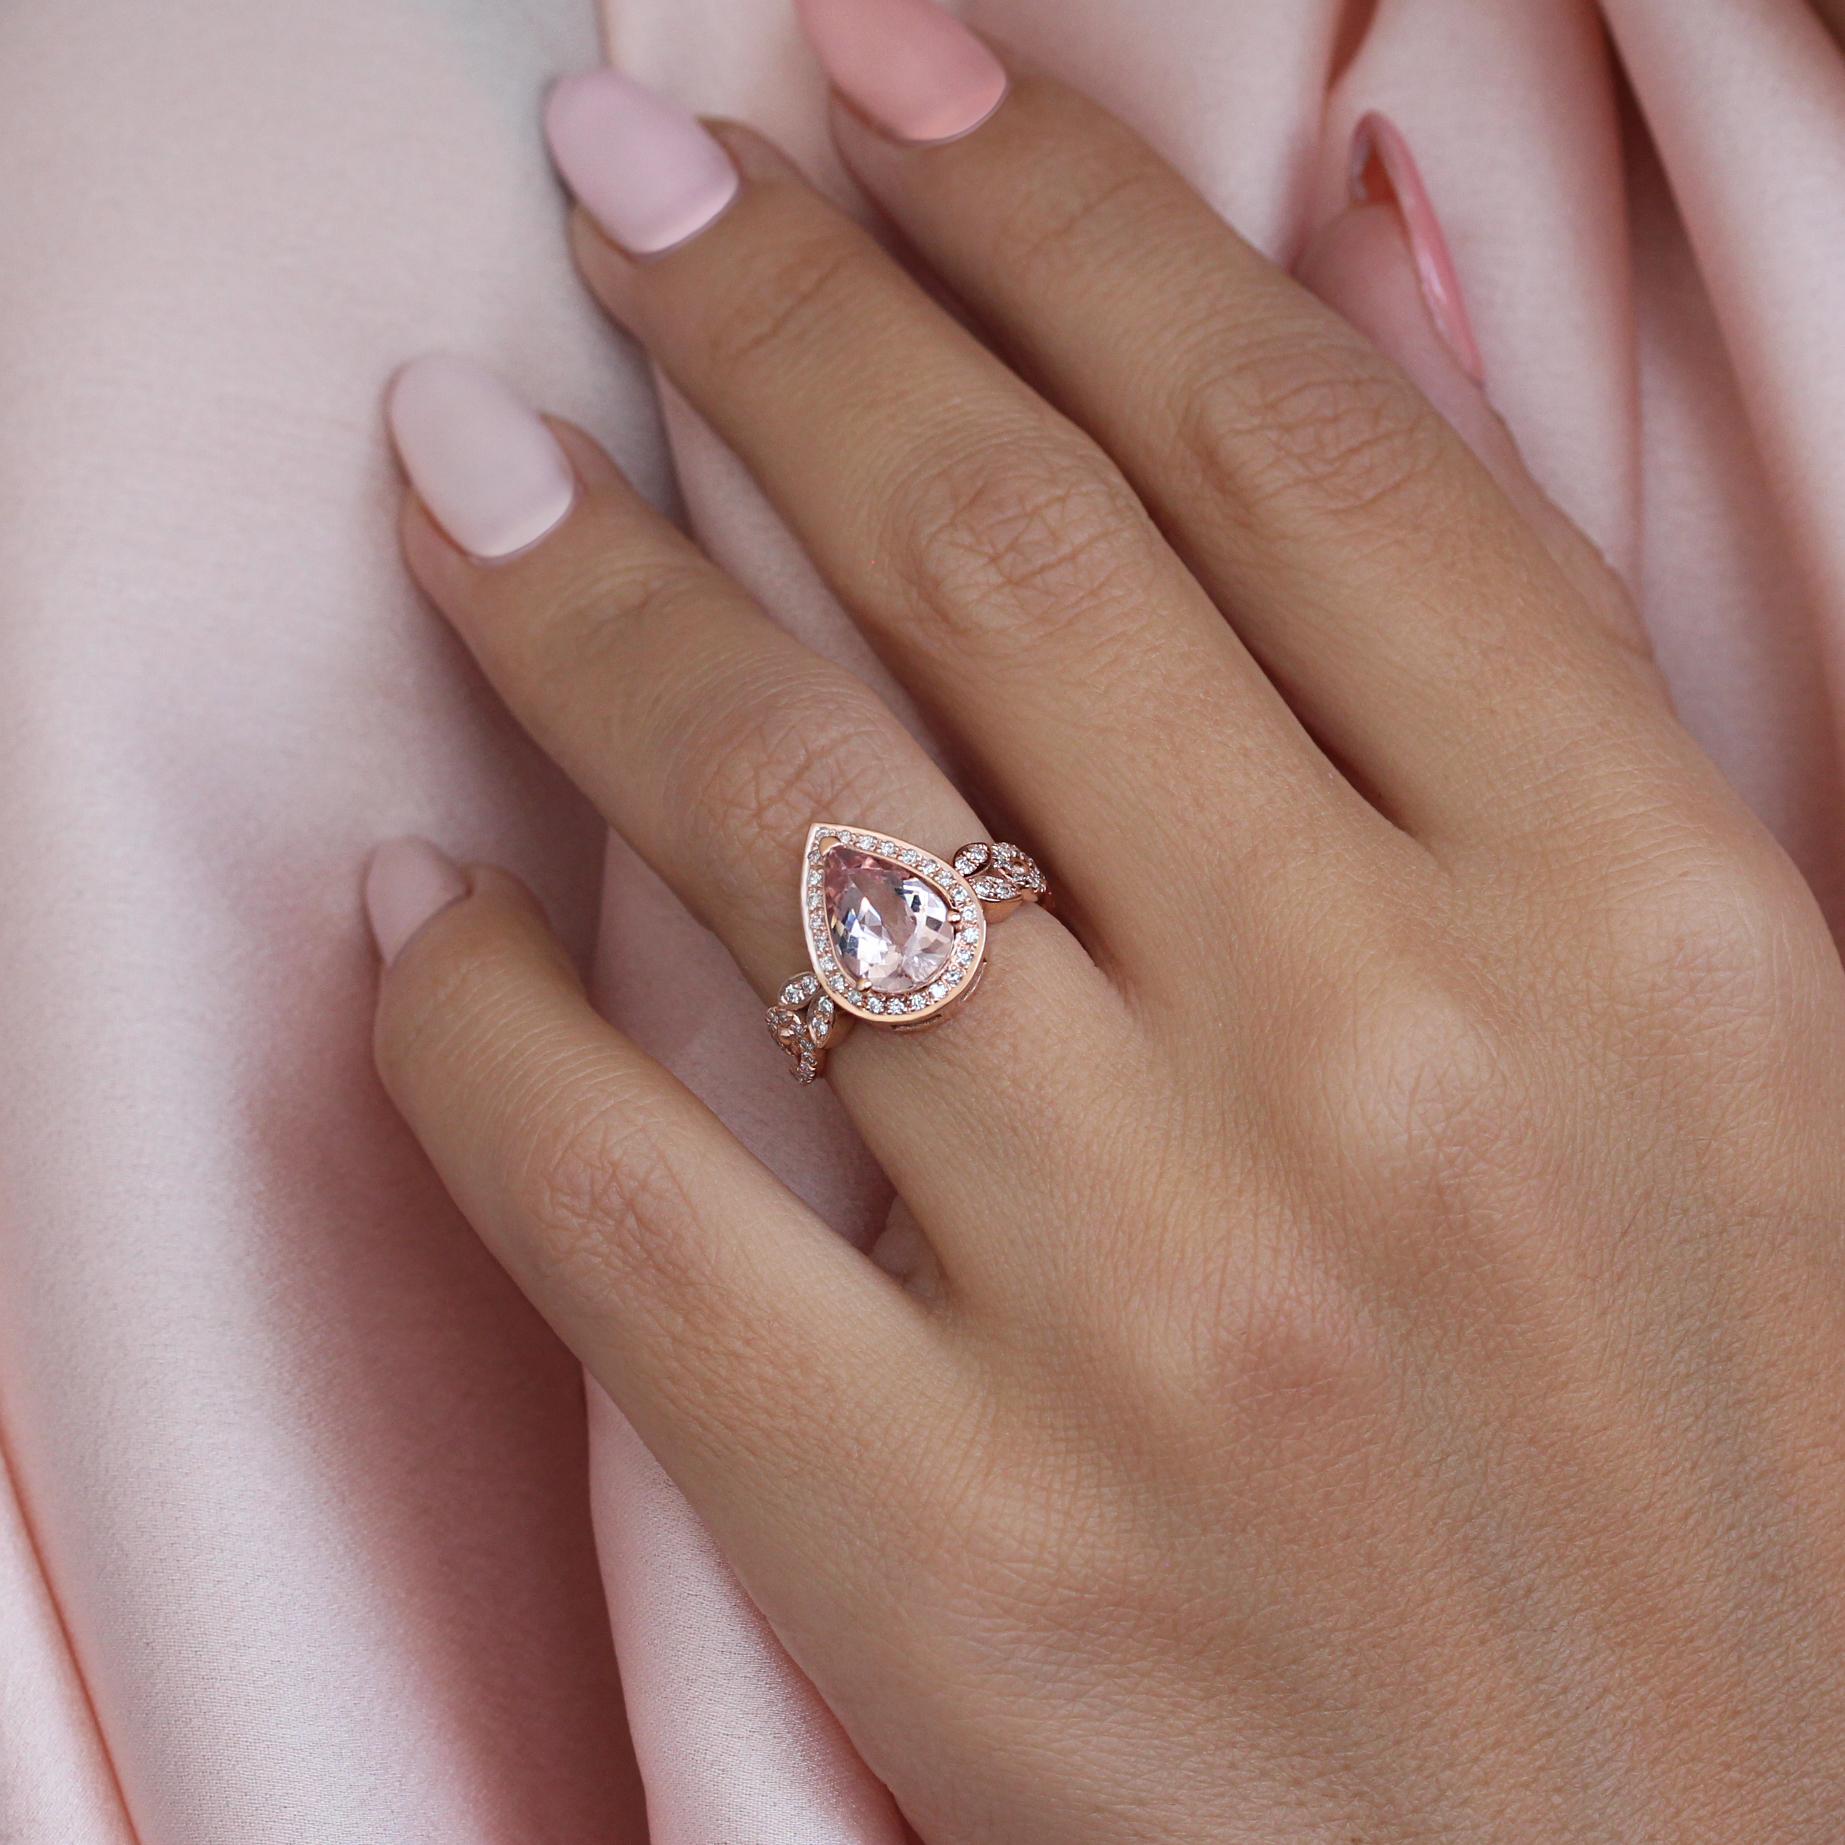 Pear-shaped morganite engagement wave band ring.
The list is for the engagement ring only.
Handmade with care. 
An original design by Silly Shiny Diamonds. 

Details:
* Center stone shape: Pear shape.
* Center stone type: Natural morganite,